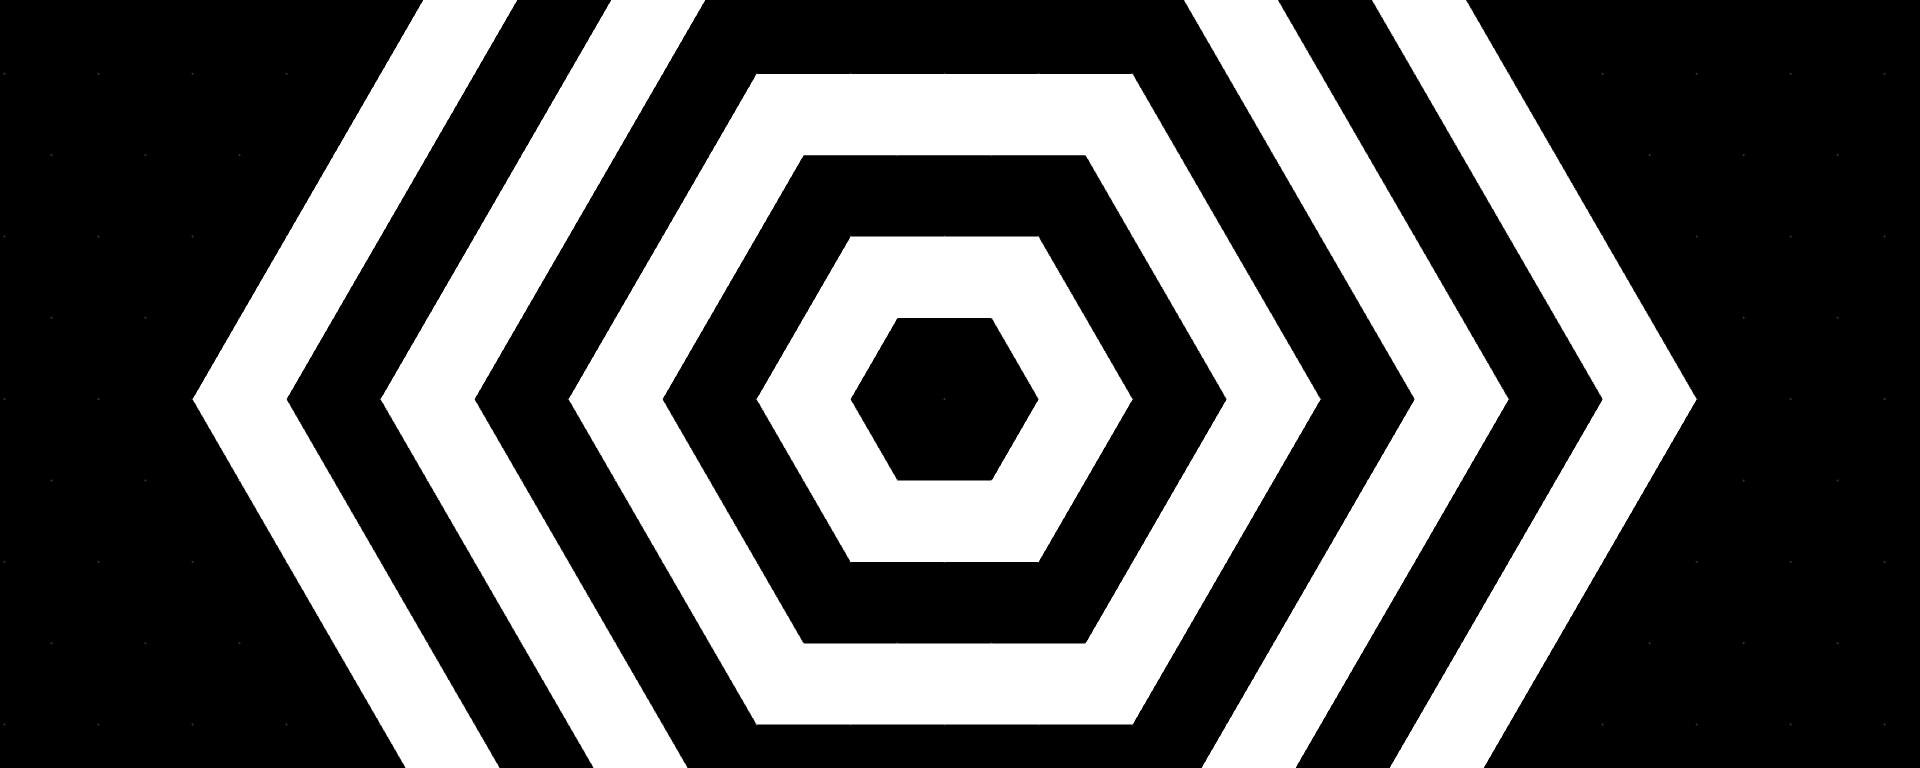 Concentric Hexagons (Photo courtesy of <a href="https://flic.kr/p/huyZri">Simon Strandgaard on Flickr </a>).Edited by O's List under <a href="https://creativecommons.org/licenses/by/2.0/legalcode">the Creative Commons License</a>.)